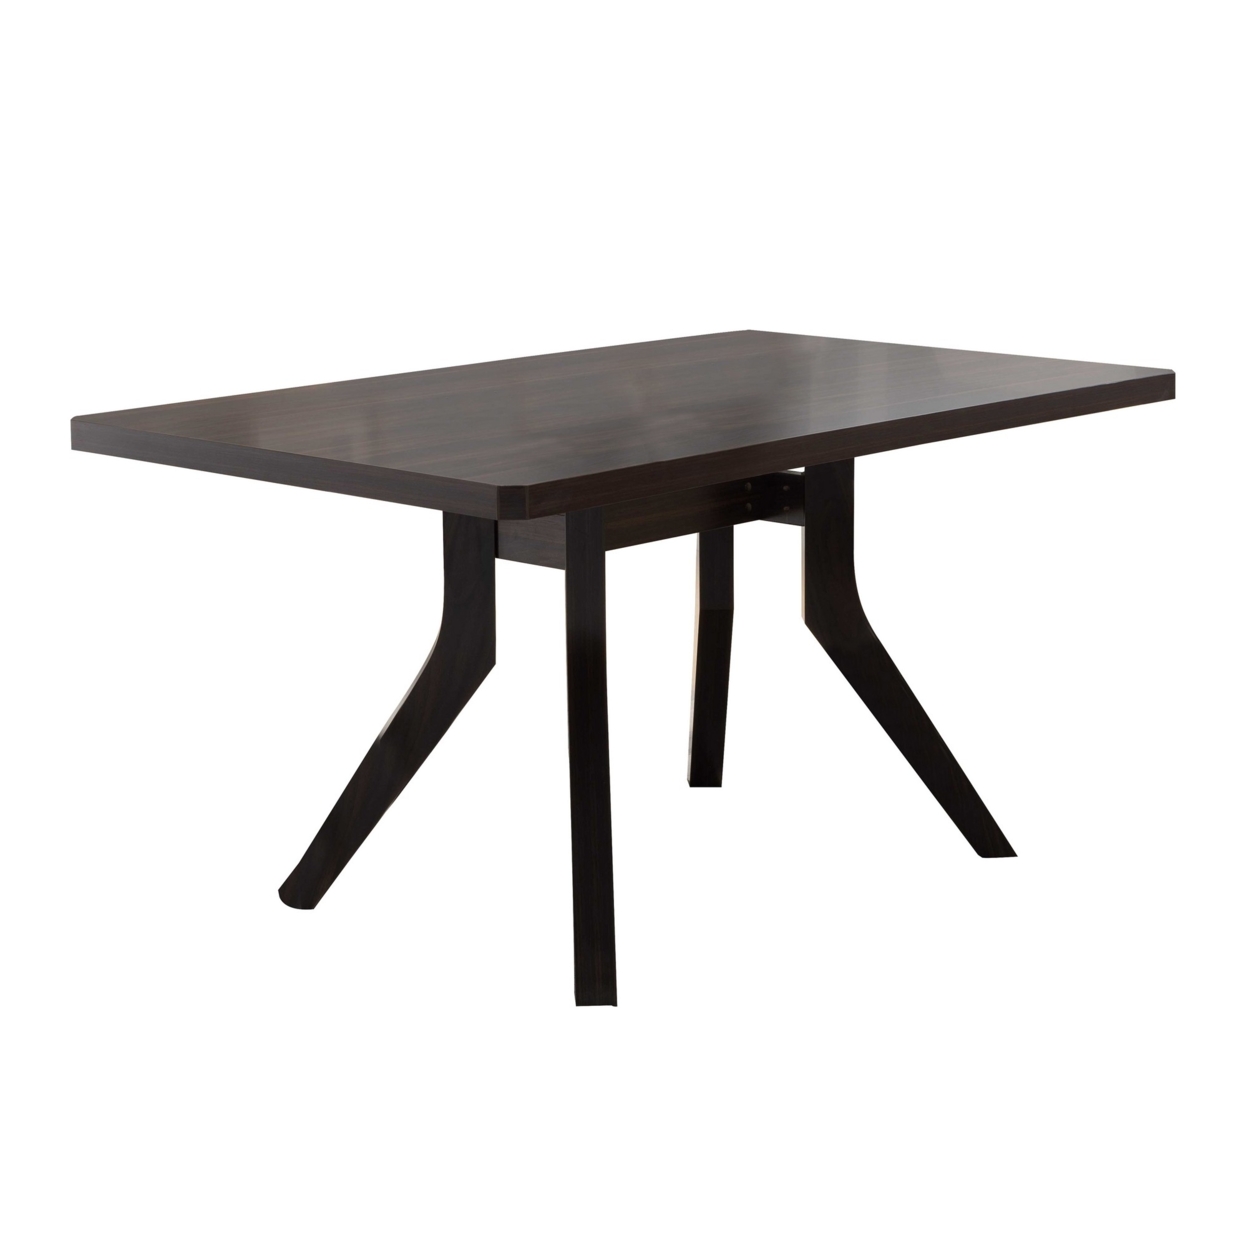 Dining Table With Wooden Top And Angled Legs, Brown- Saltoro Sherpi